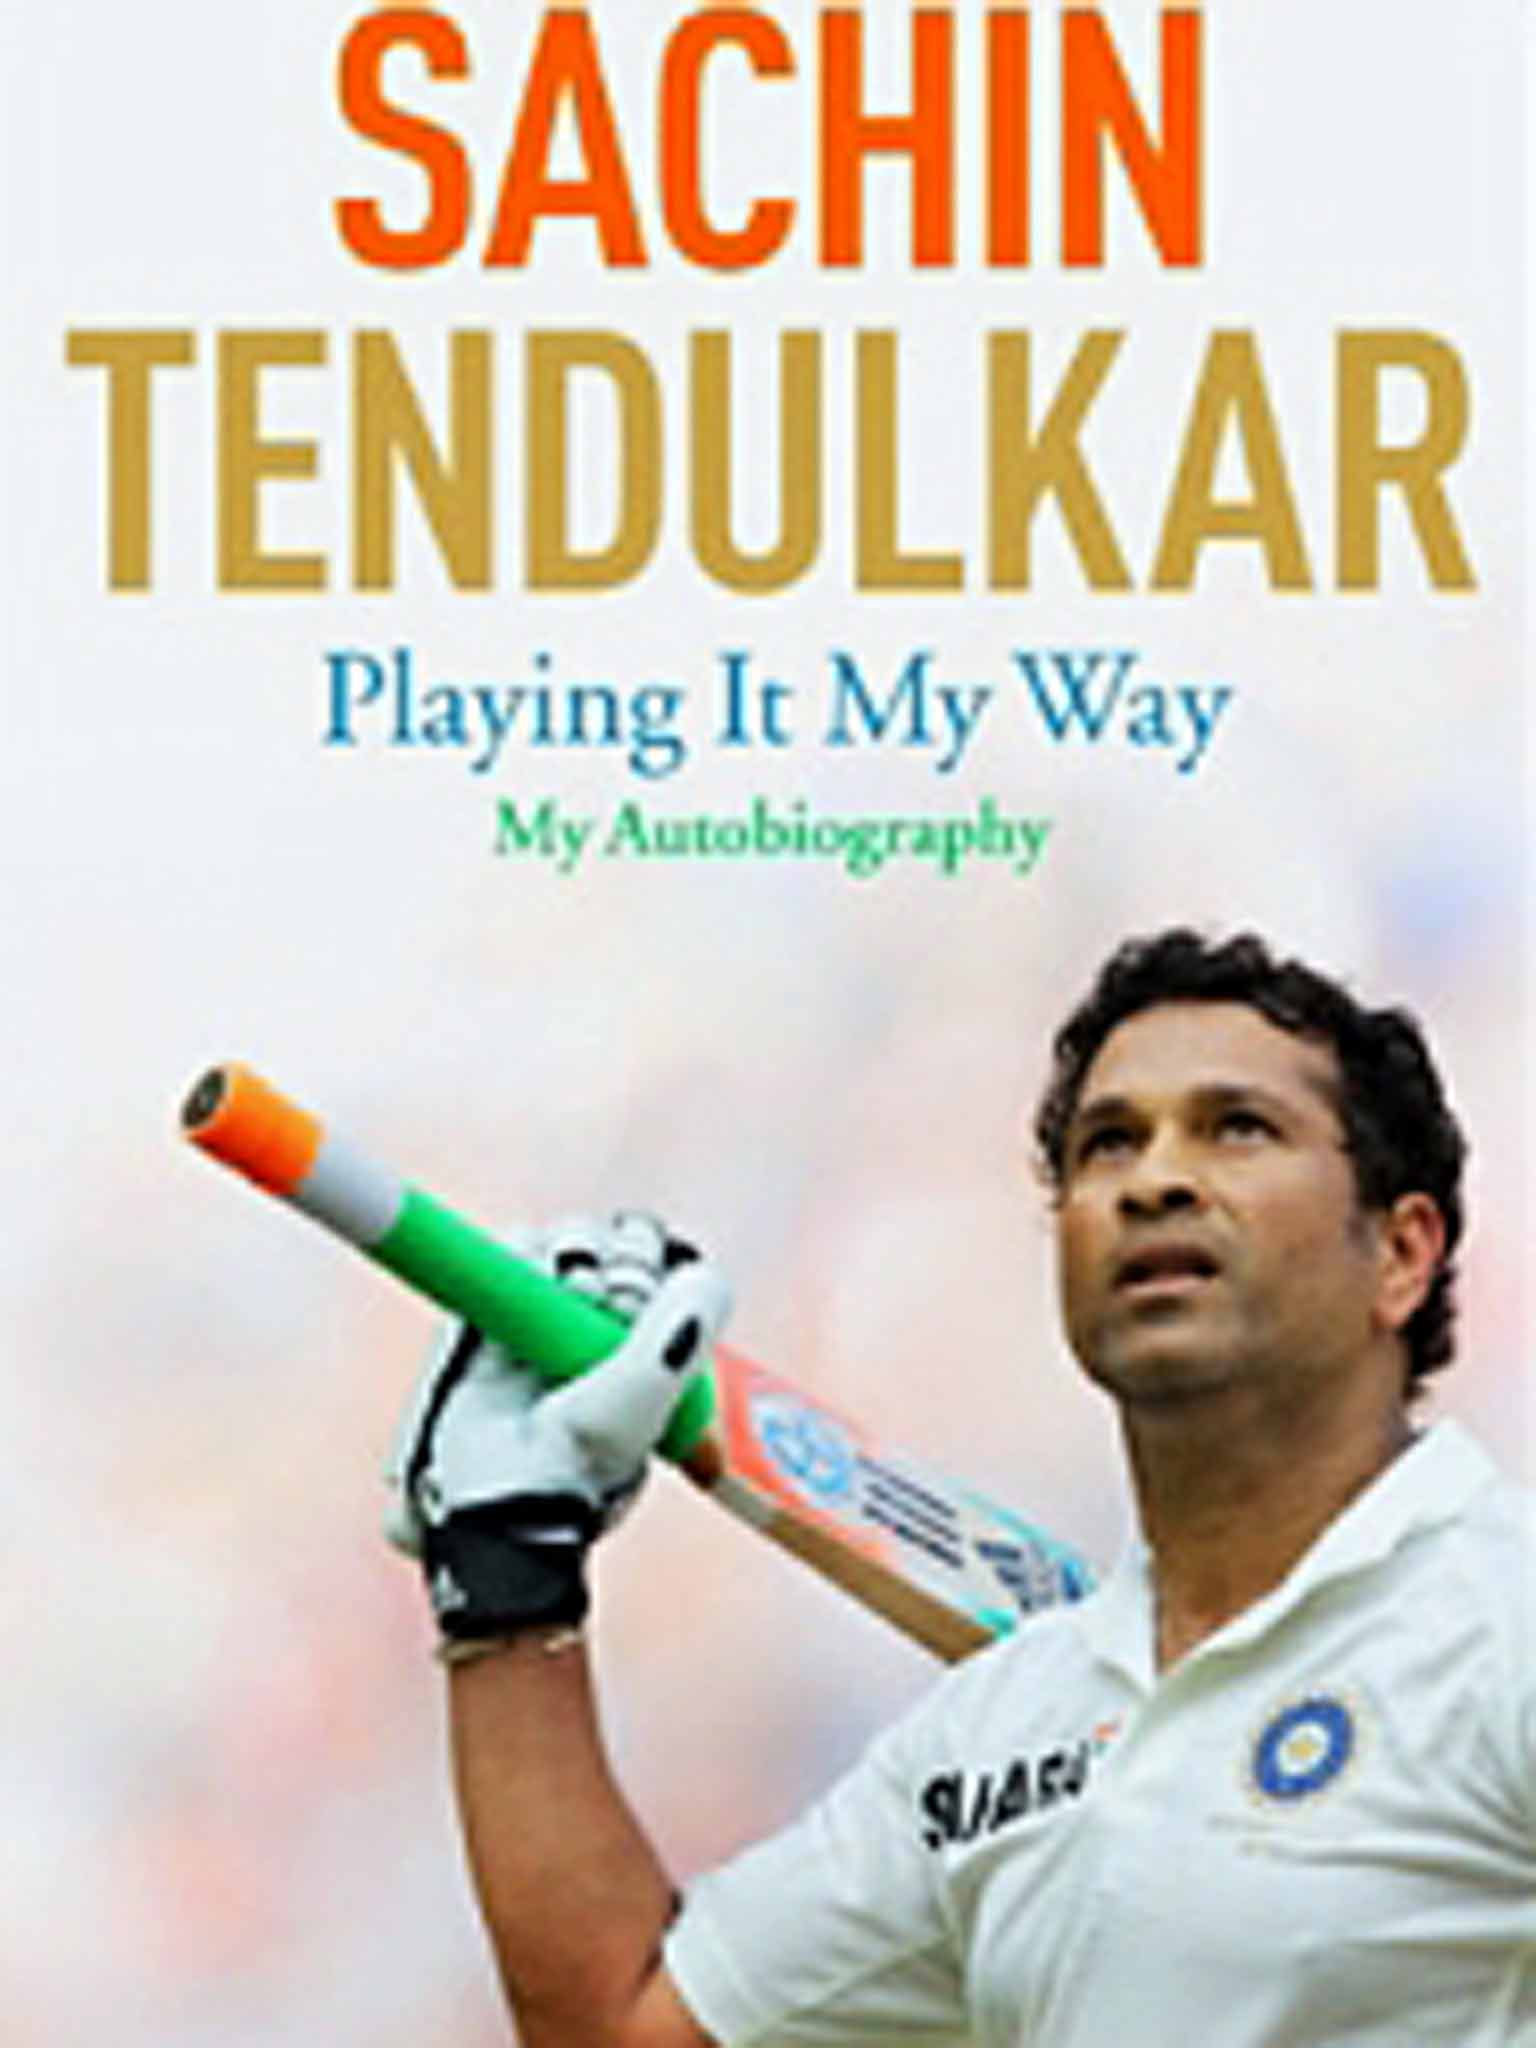 book review on playing it my way